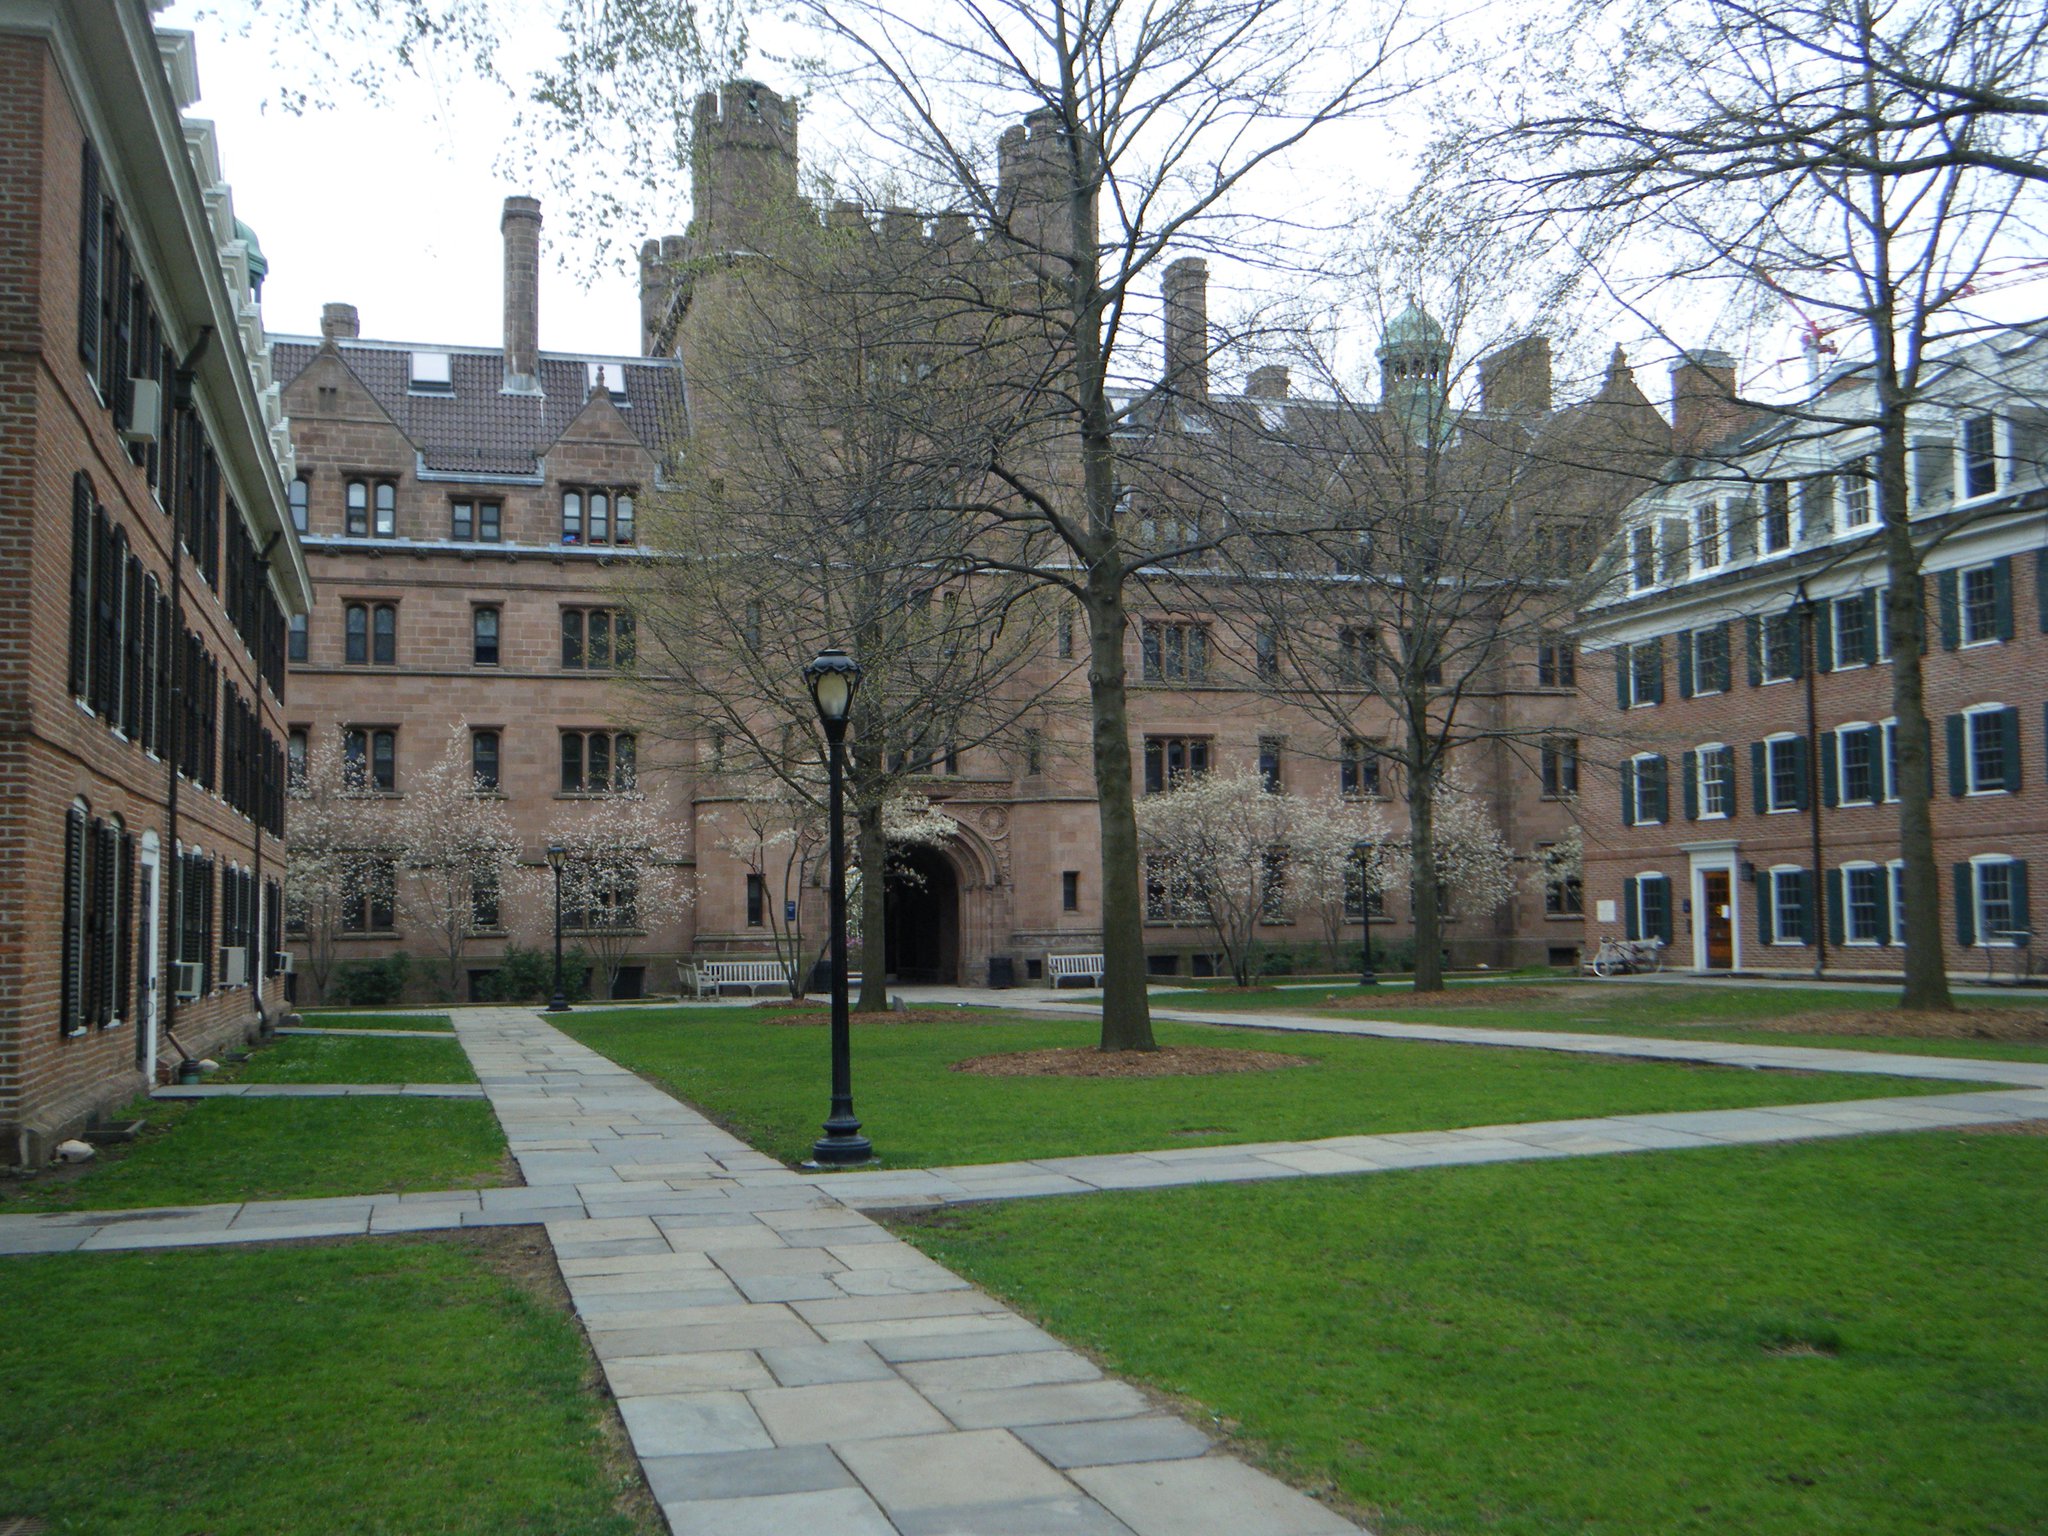 Visiting the grounds of Yale University. Third oldest University in the USA.